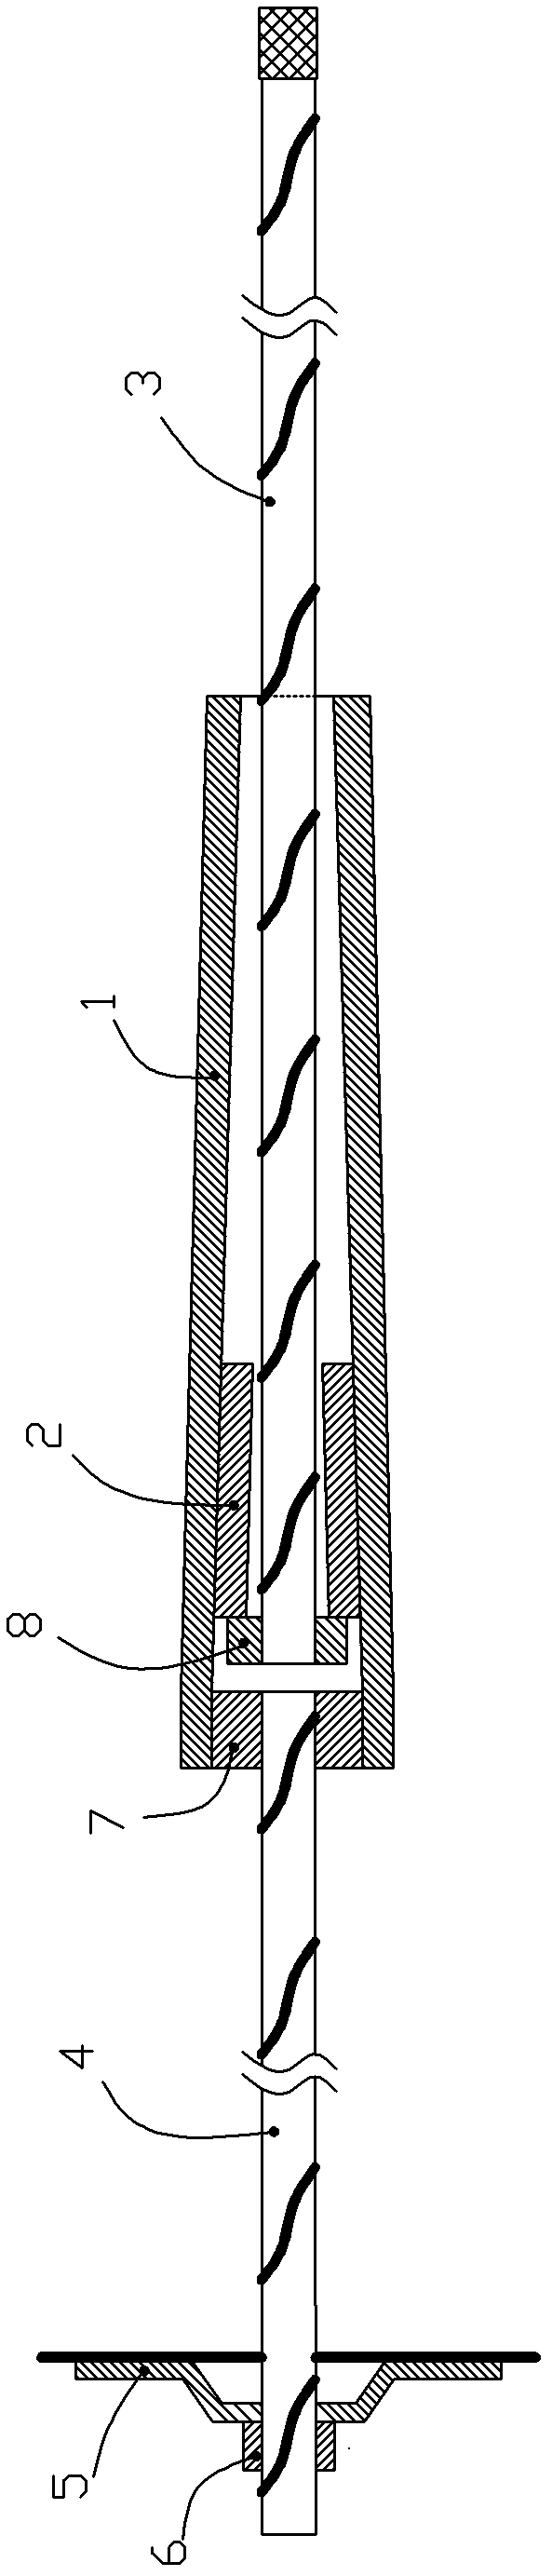 Deformation anchor cable capable of increasing resistance continuously